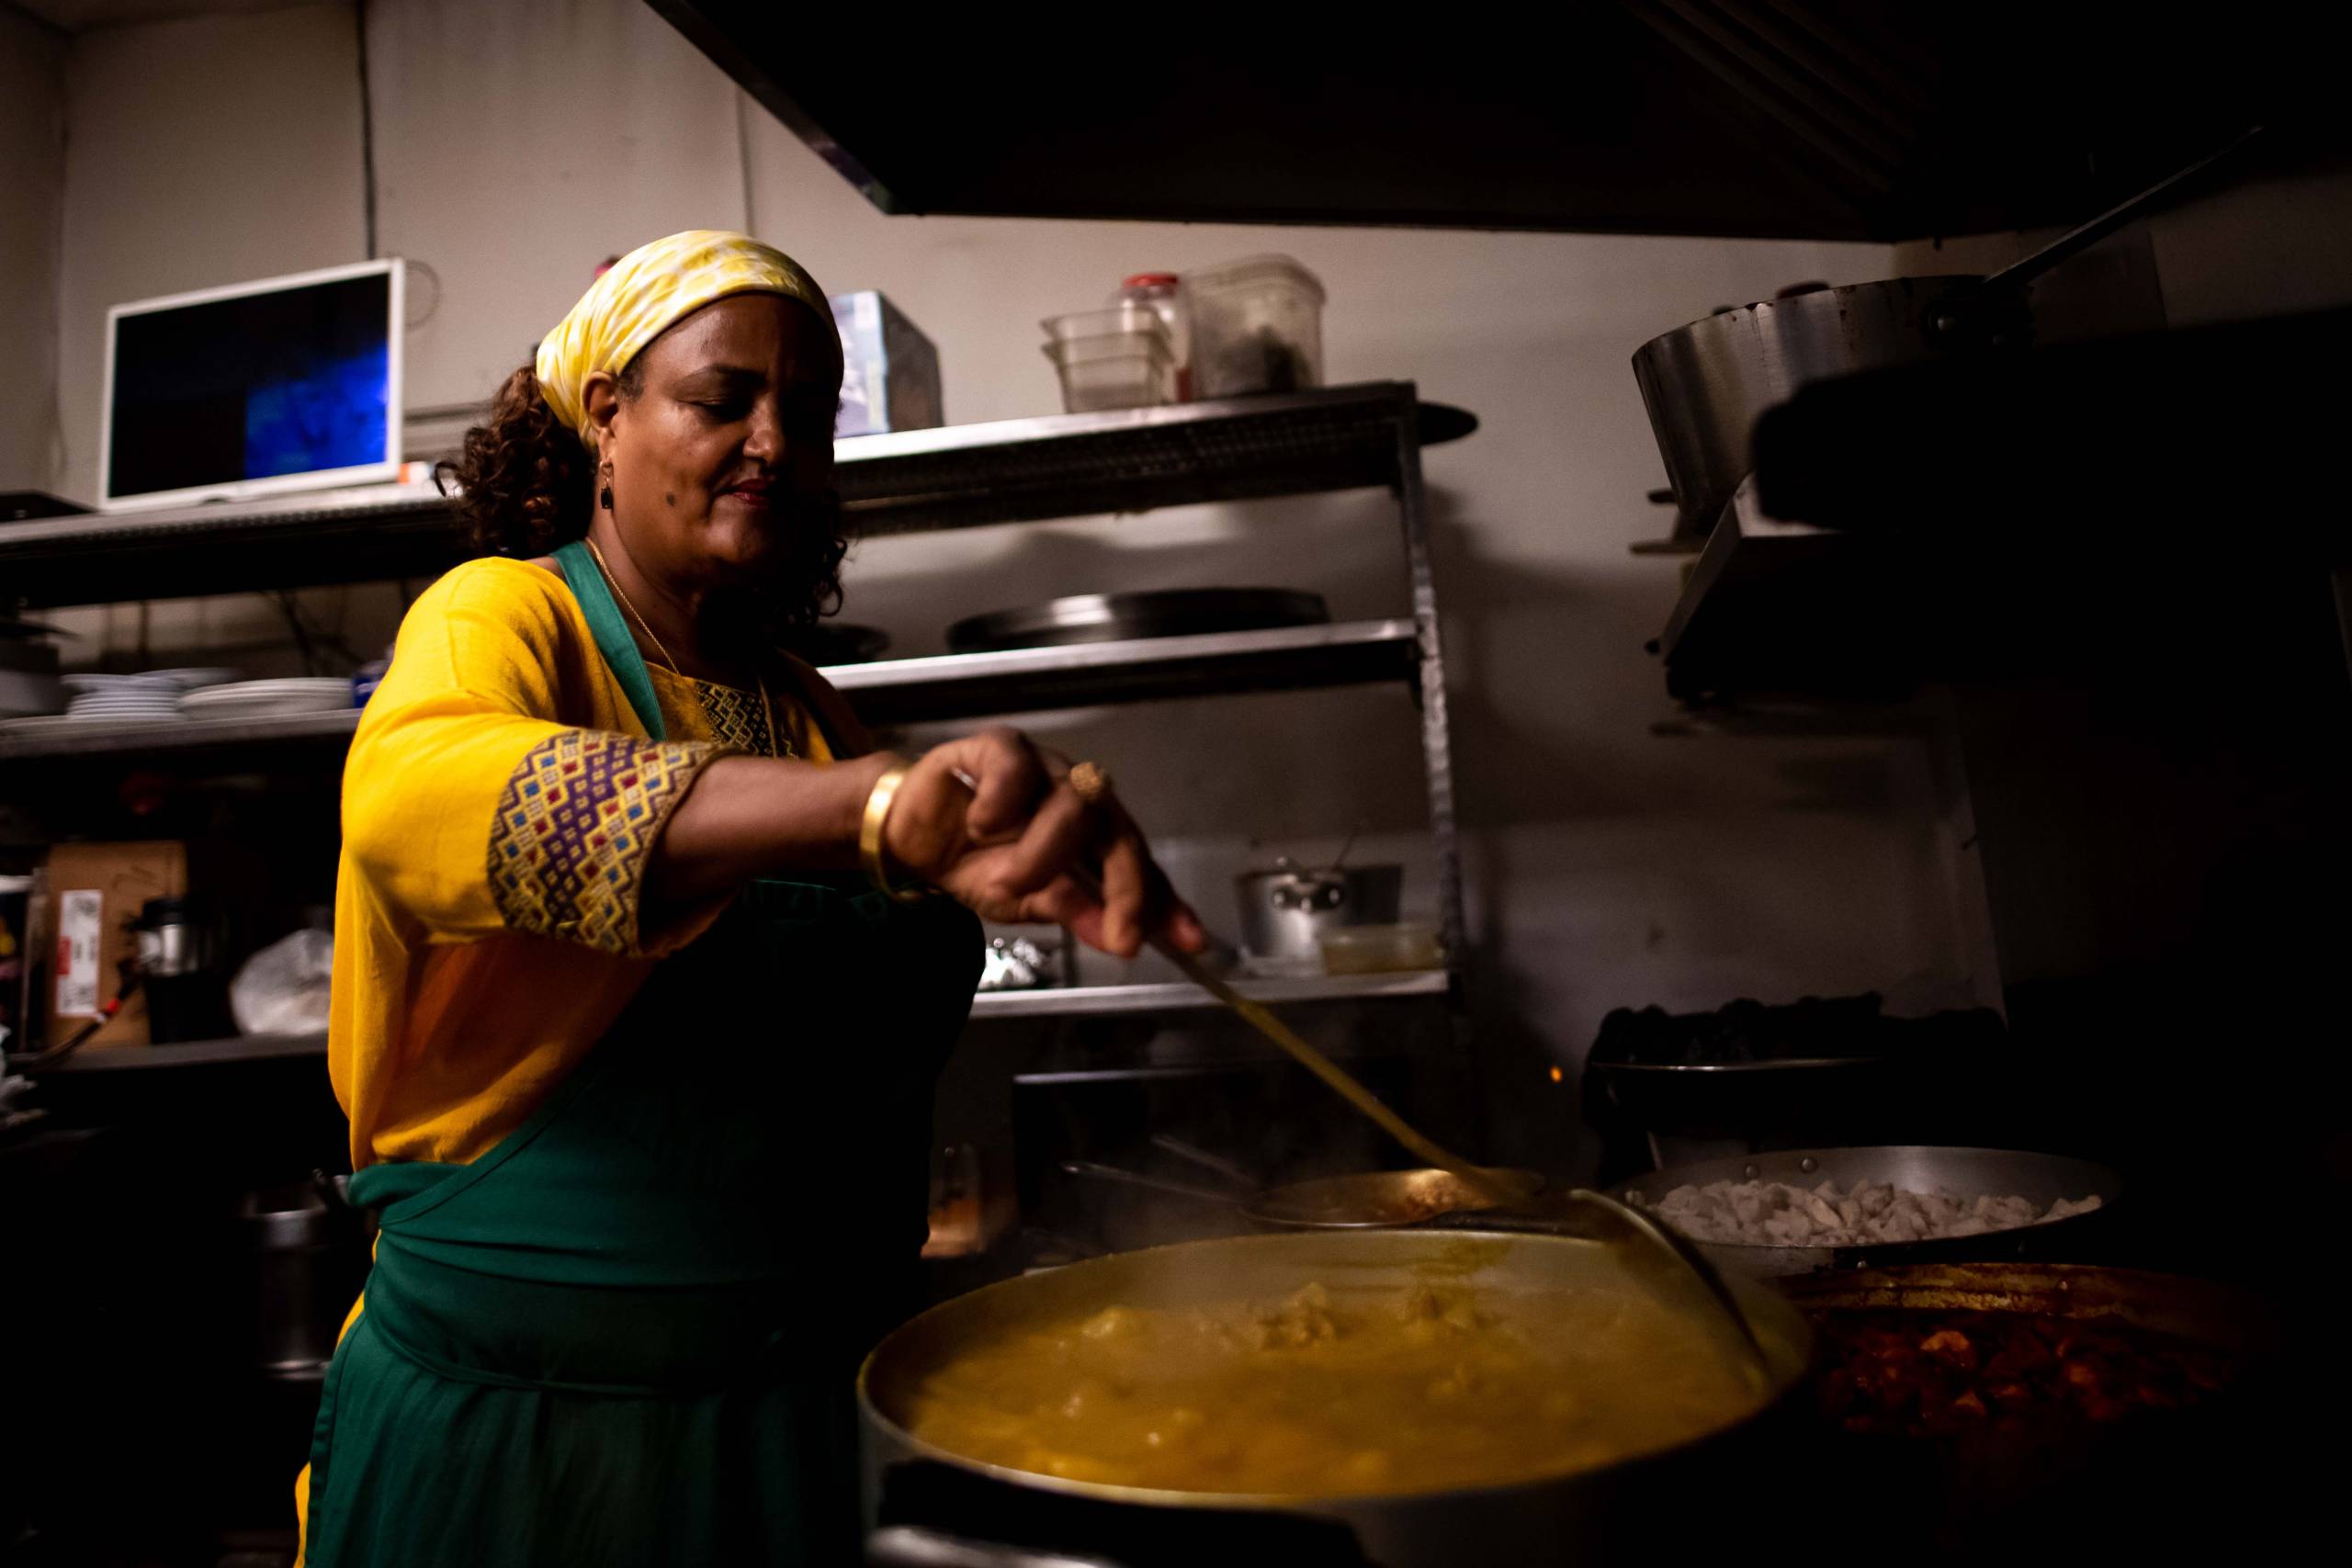 A woman cooks a large pot of stew in a restaurant kitchen.